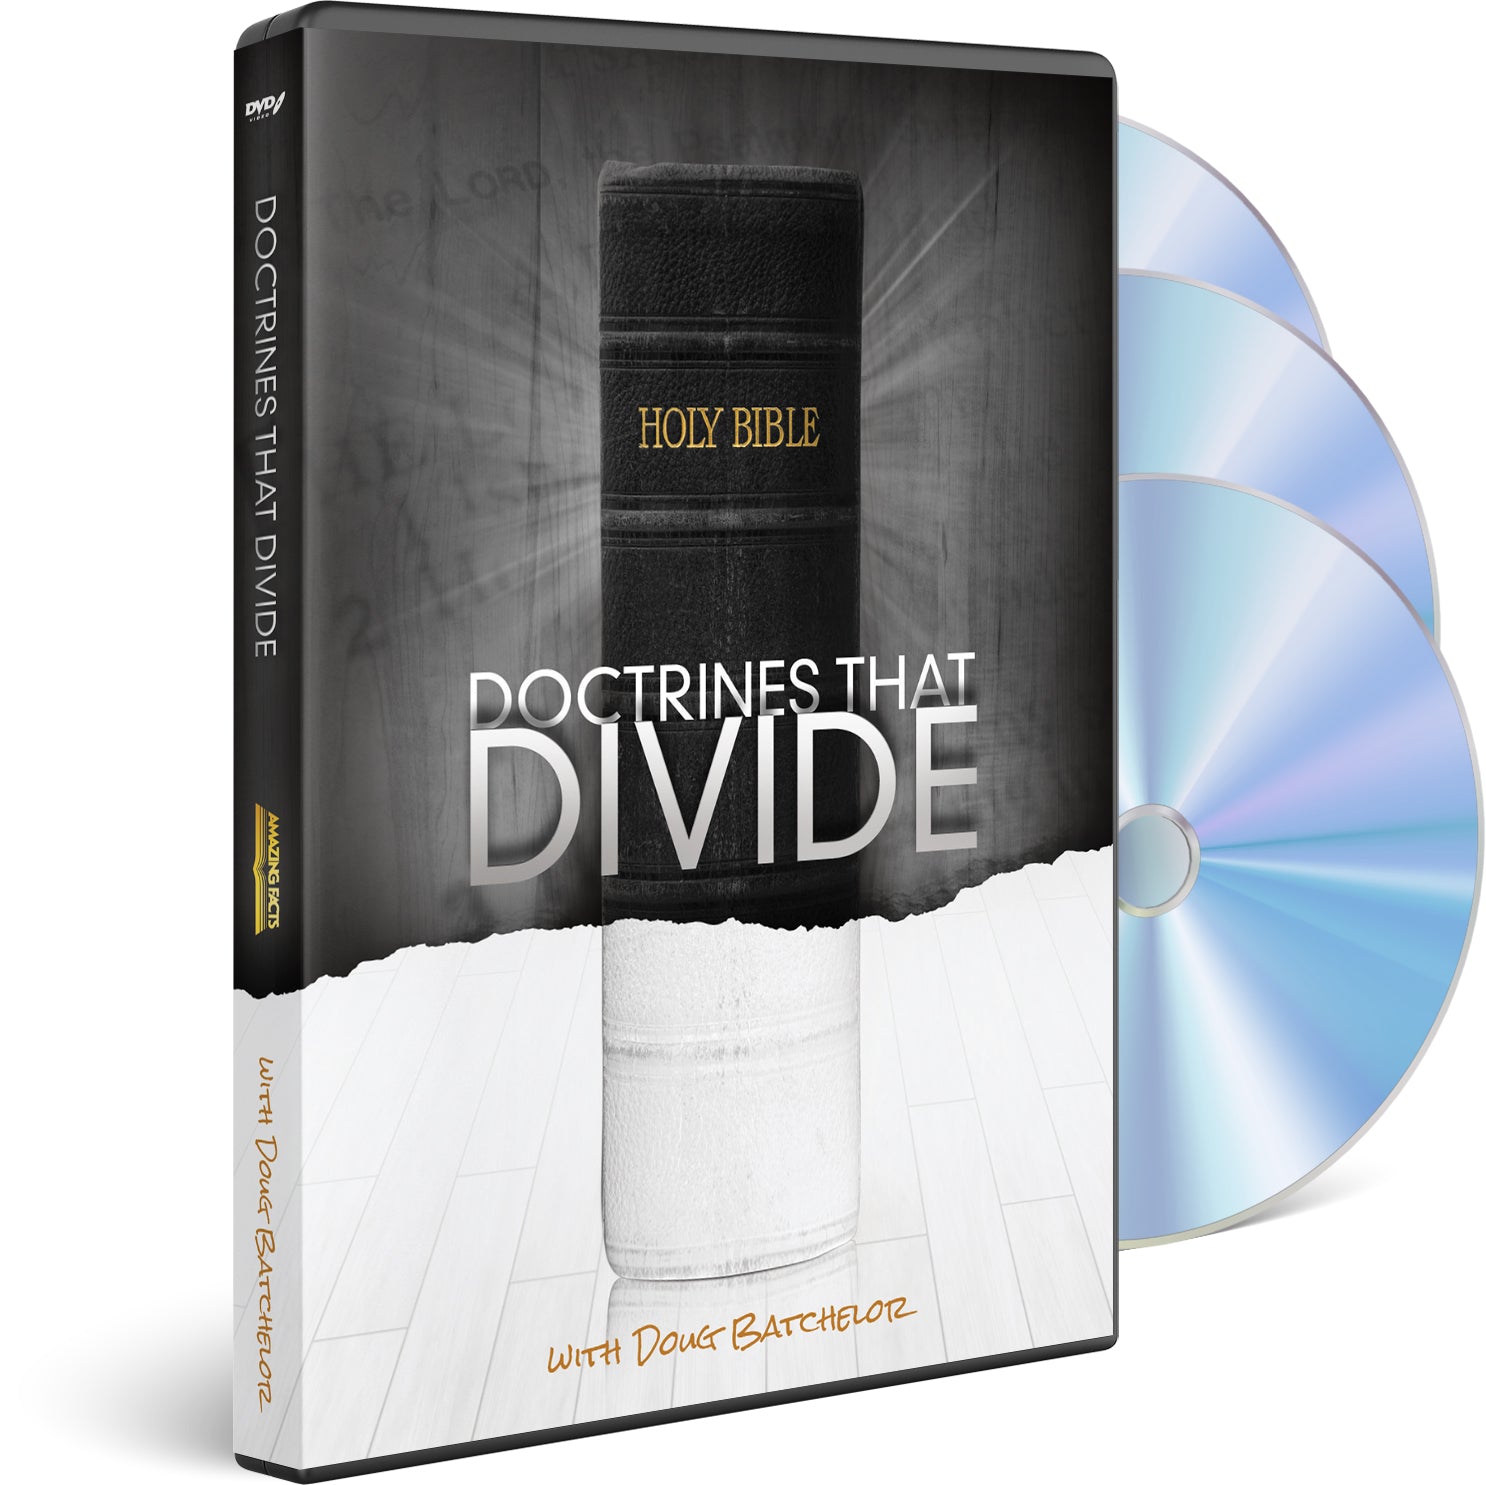 Doctrines That Divide by Doug Batchelor